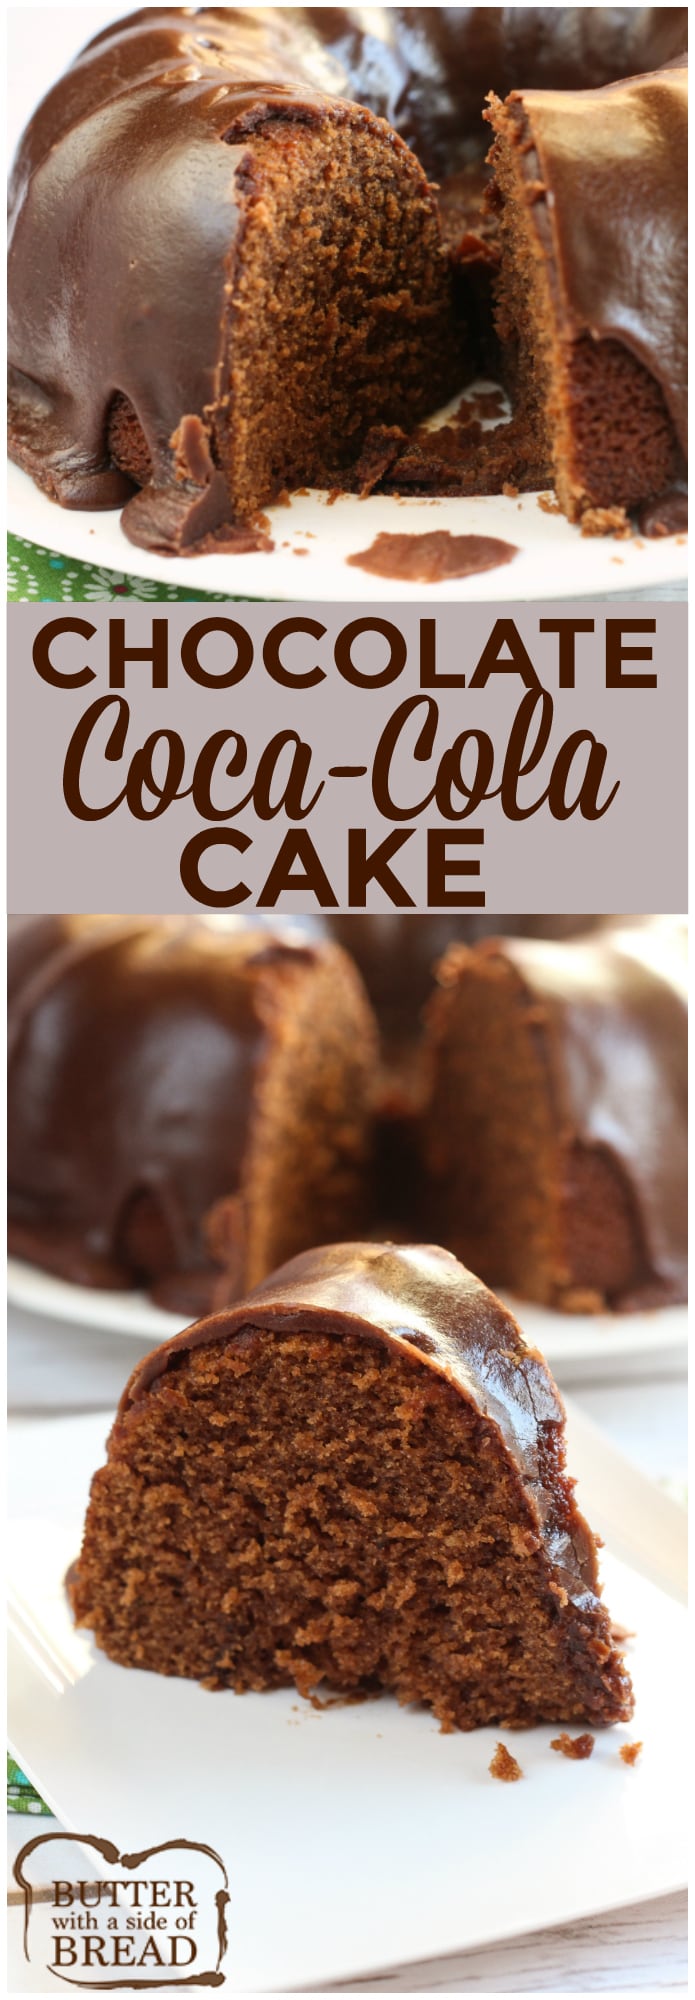 Chocolate Coca-Cola Cake is made with soda, buttermilk and marshmallow creme! This chocolate cake is moist, delicious and turns out perfectly every time!